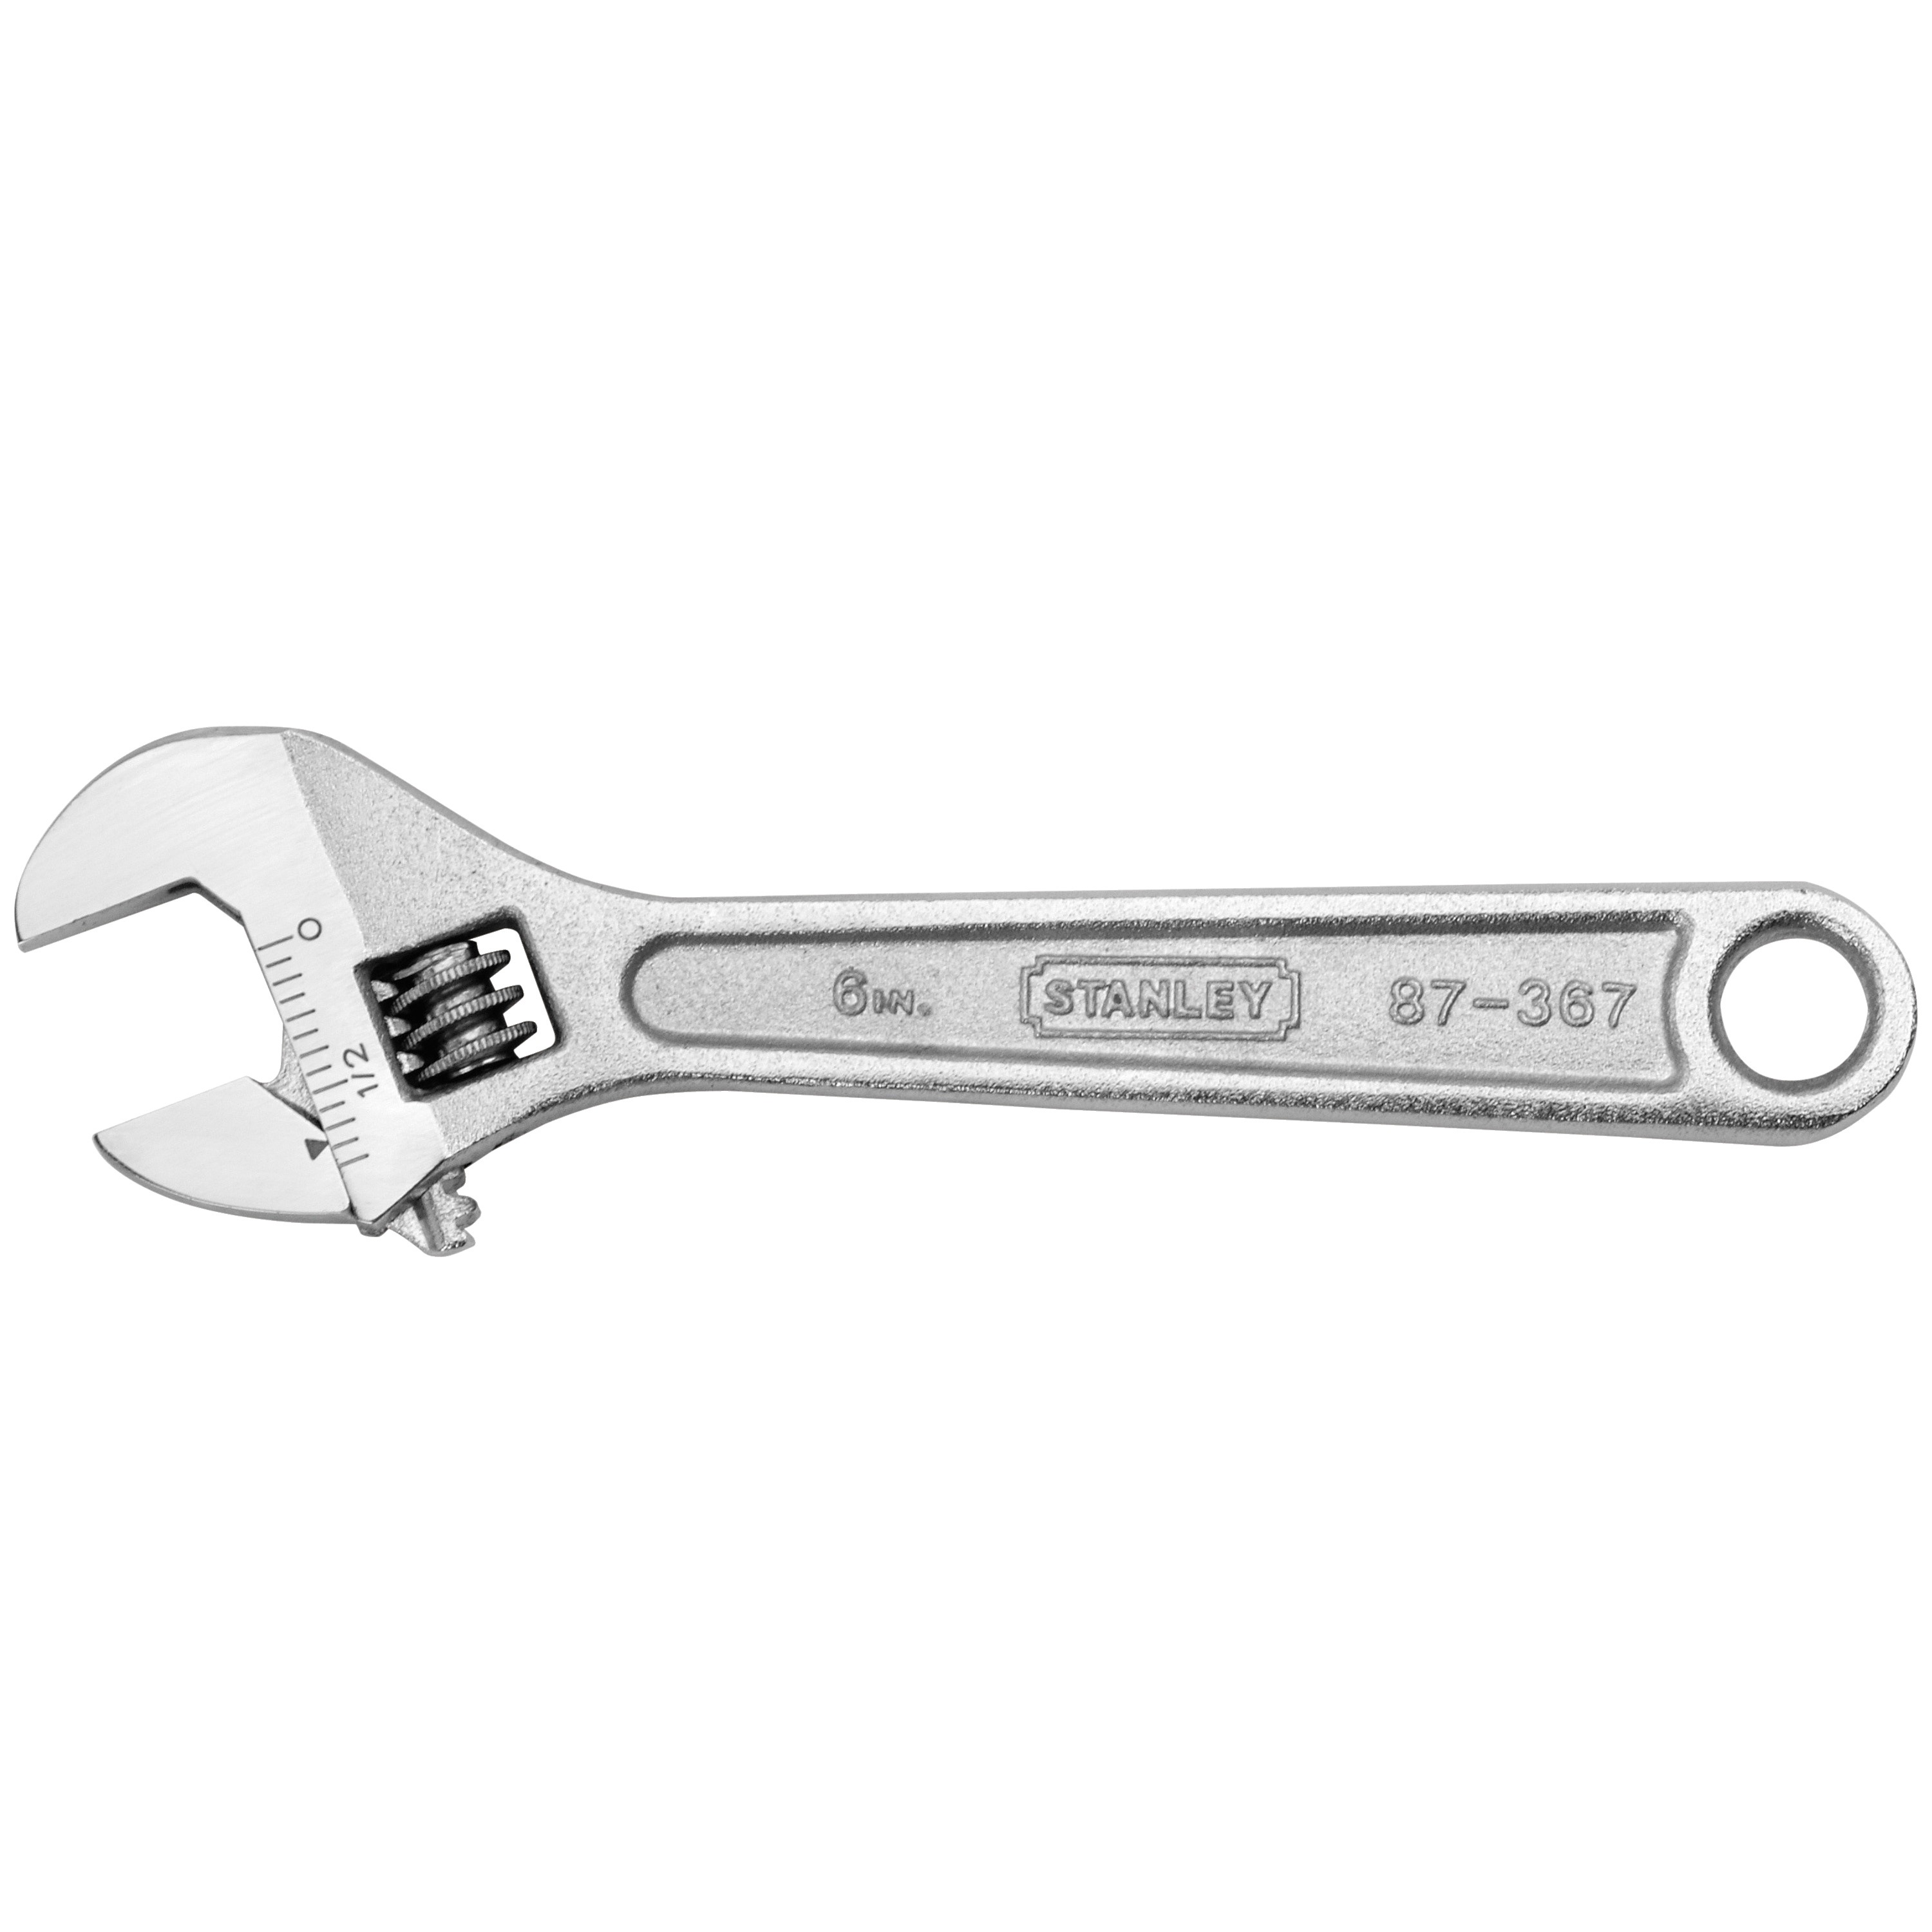 Wrenches 6 in. Adjustable Wrench - 87-367 | STANLEY Tools